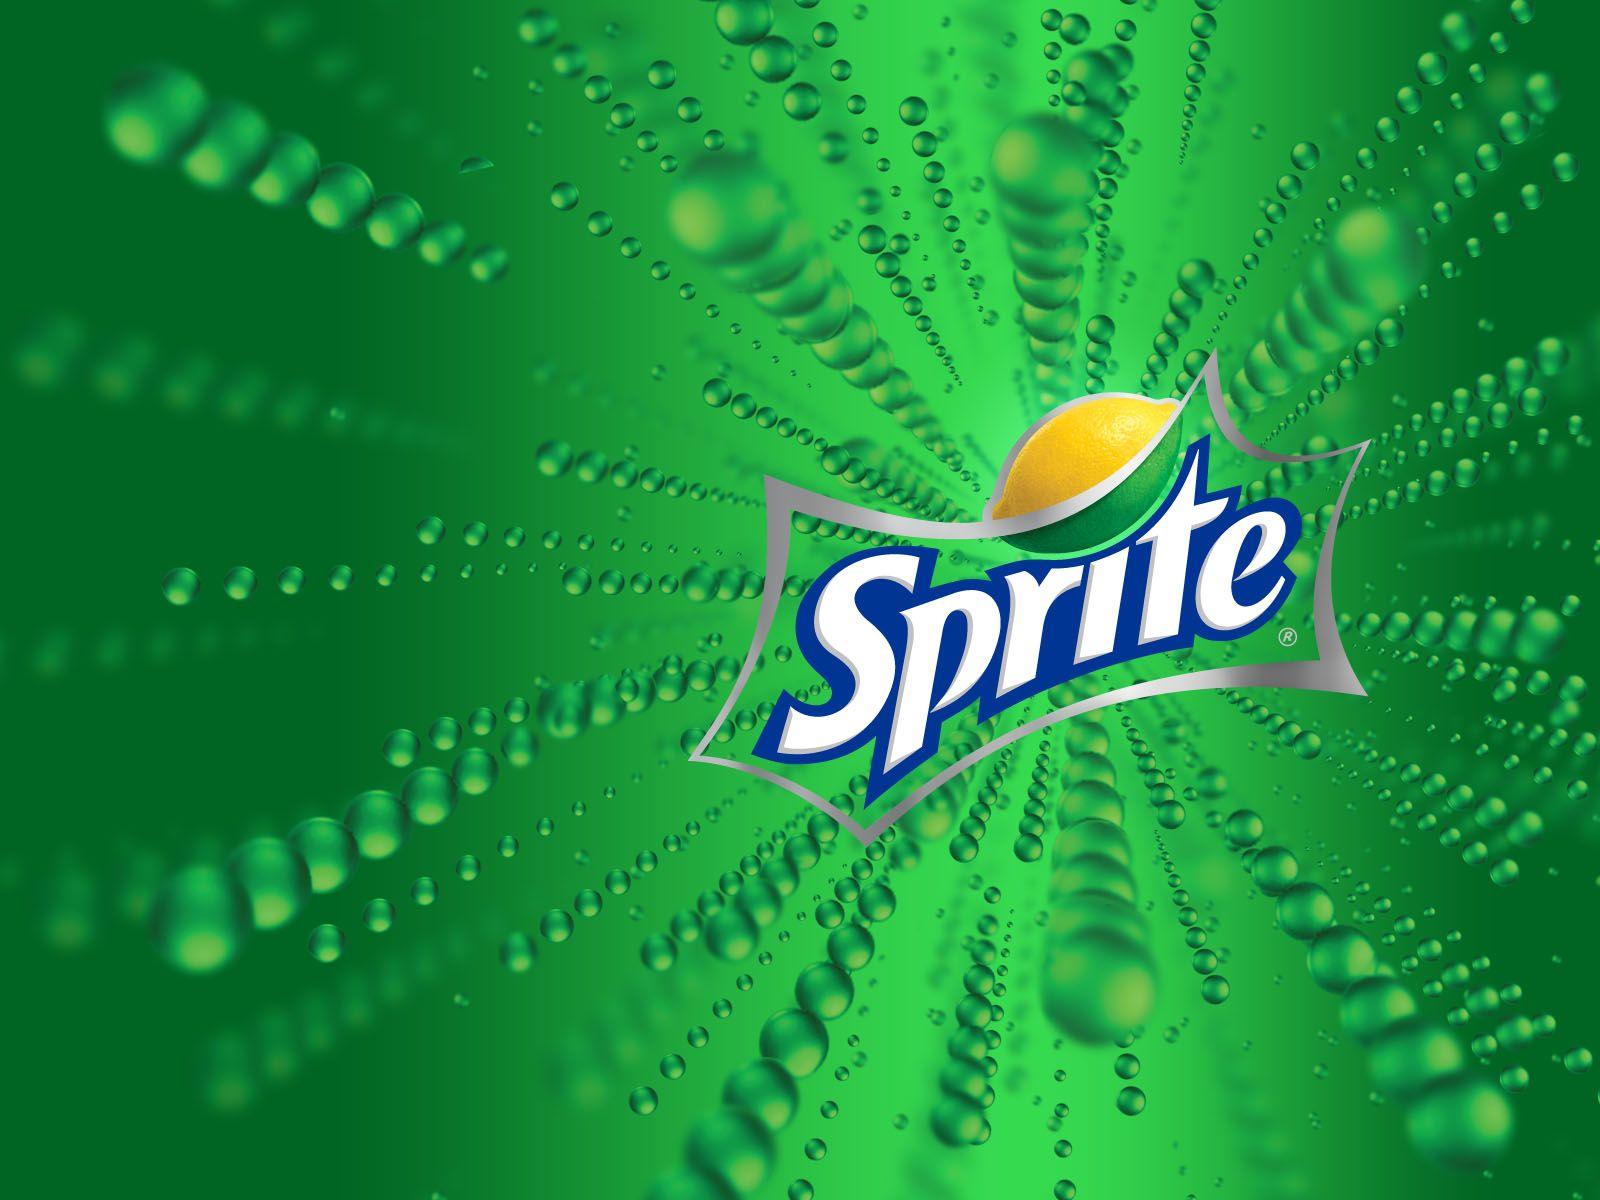 HD Free Sprite Wallpaper and Photo. HD Products Wallpaper